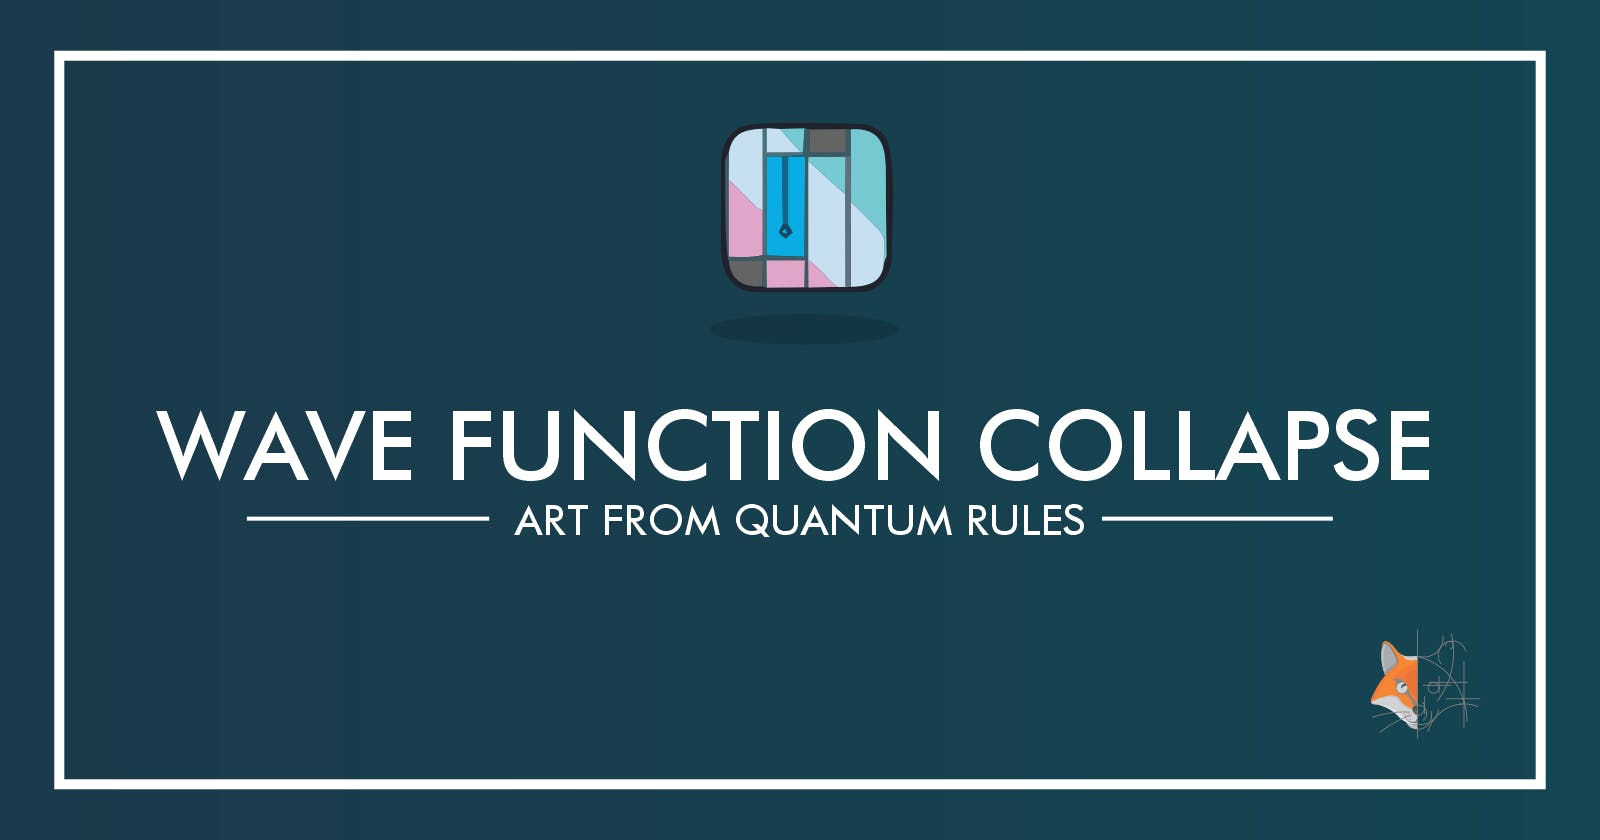 07. Wave Function Collapse - Art from Quantum Rules